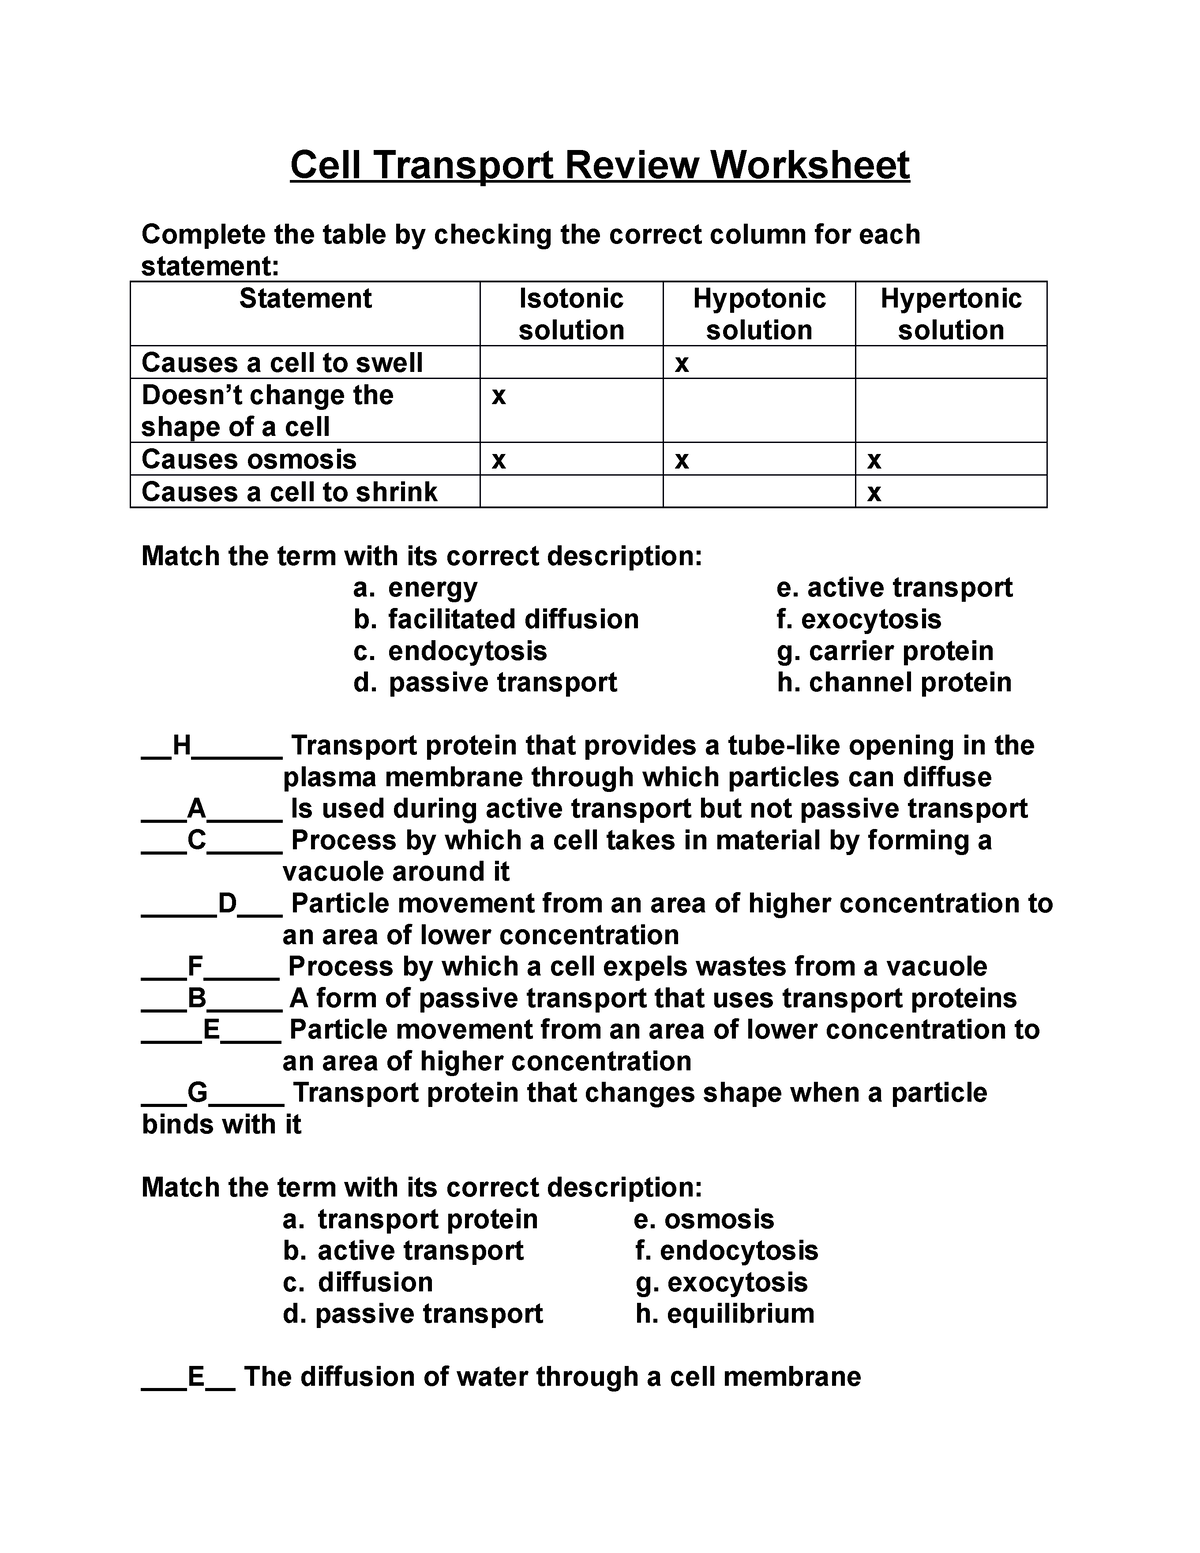 Cell Transport Activity - Cell Transport Review Worksheet Complete Pertaining To Cell Transport Review Worksheet